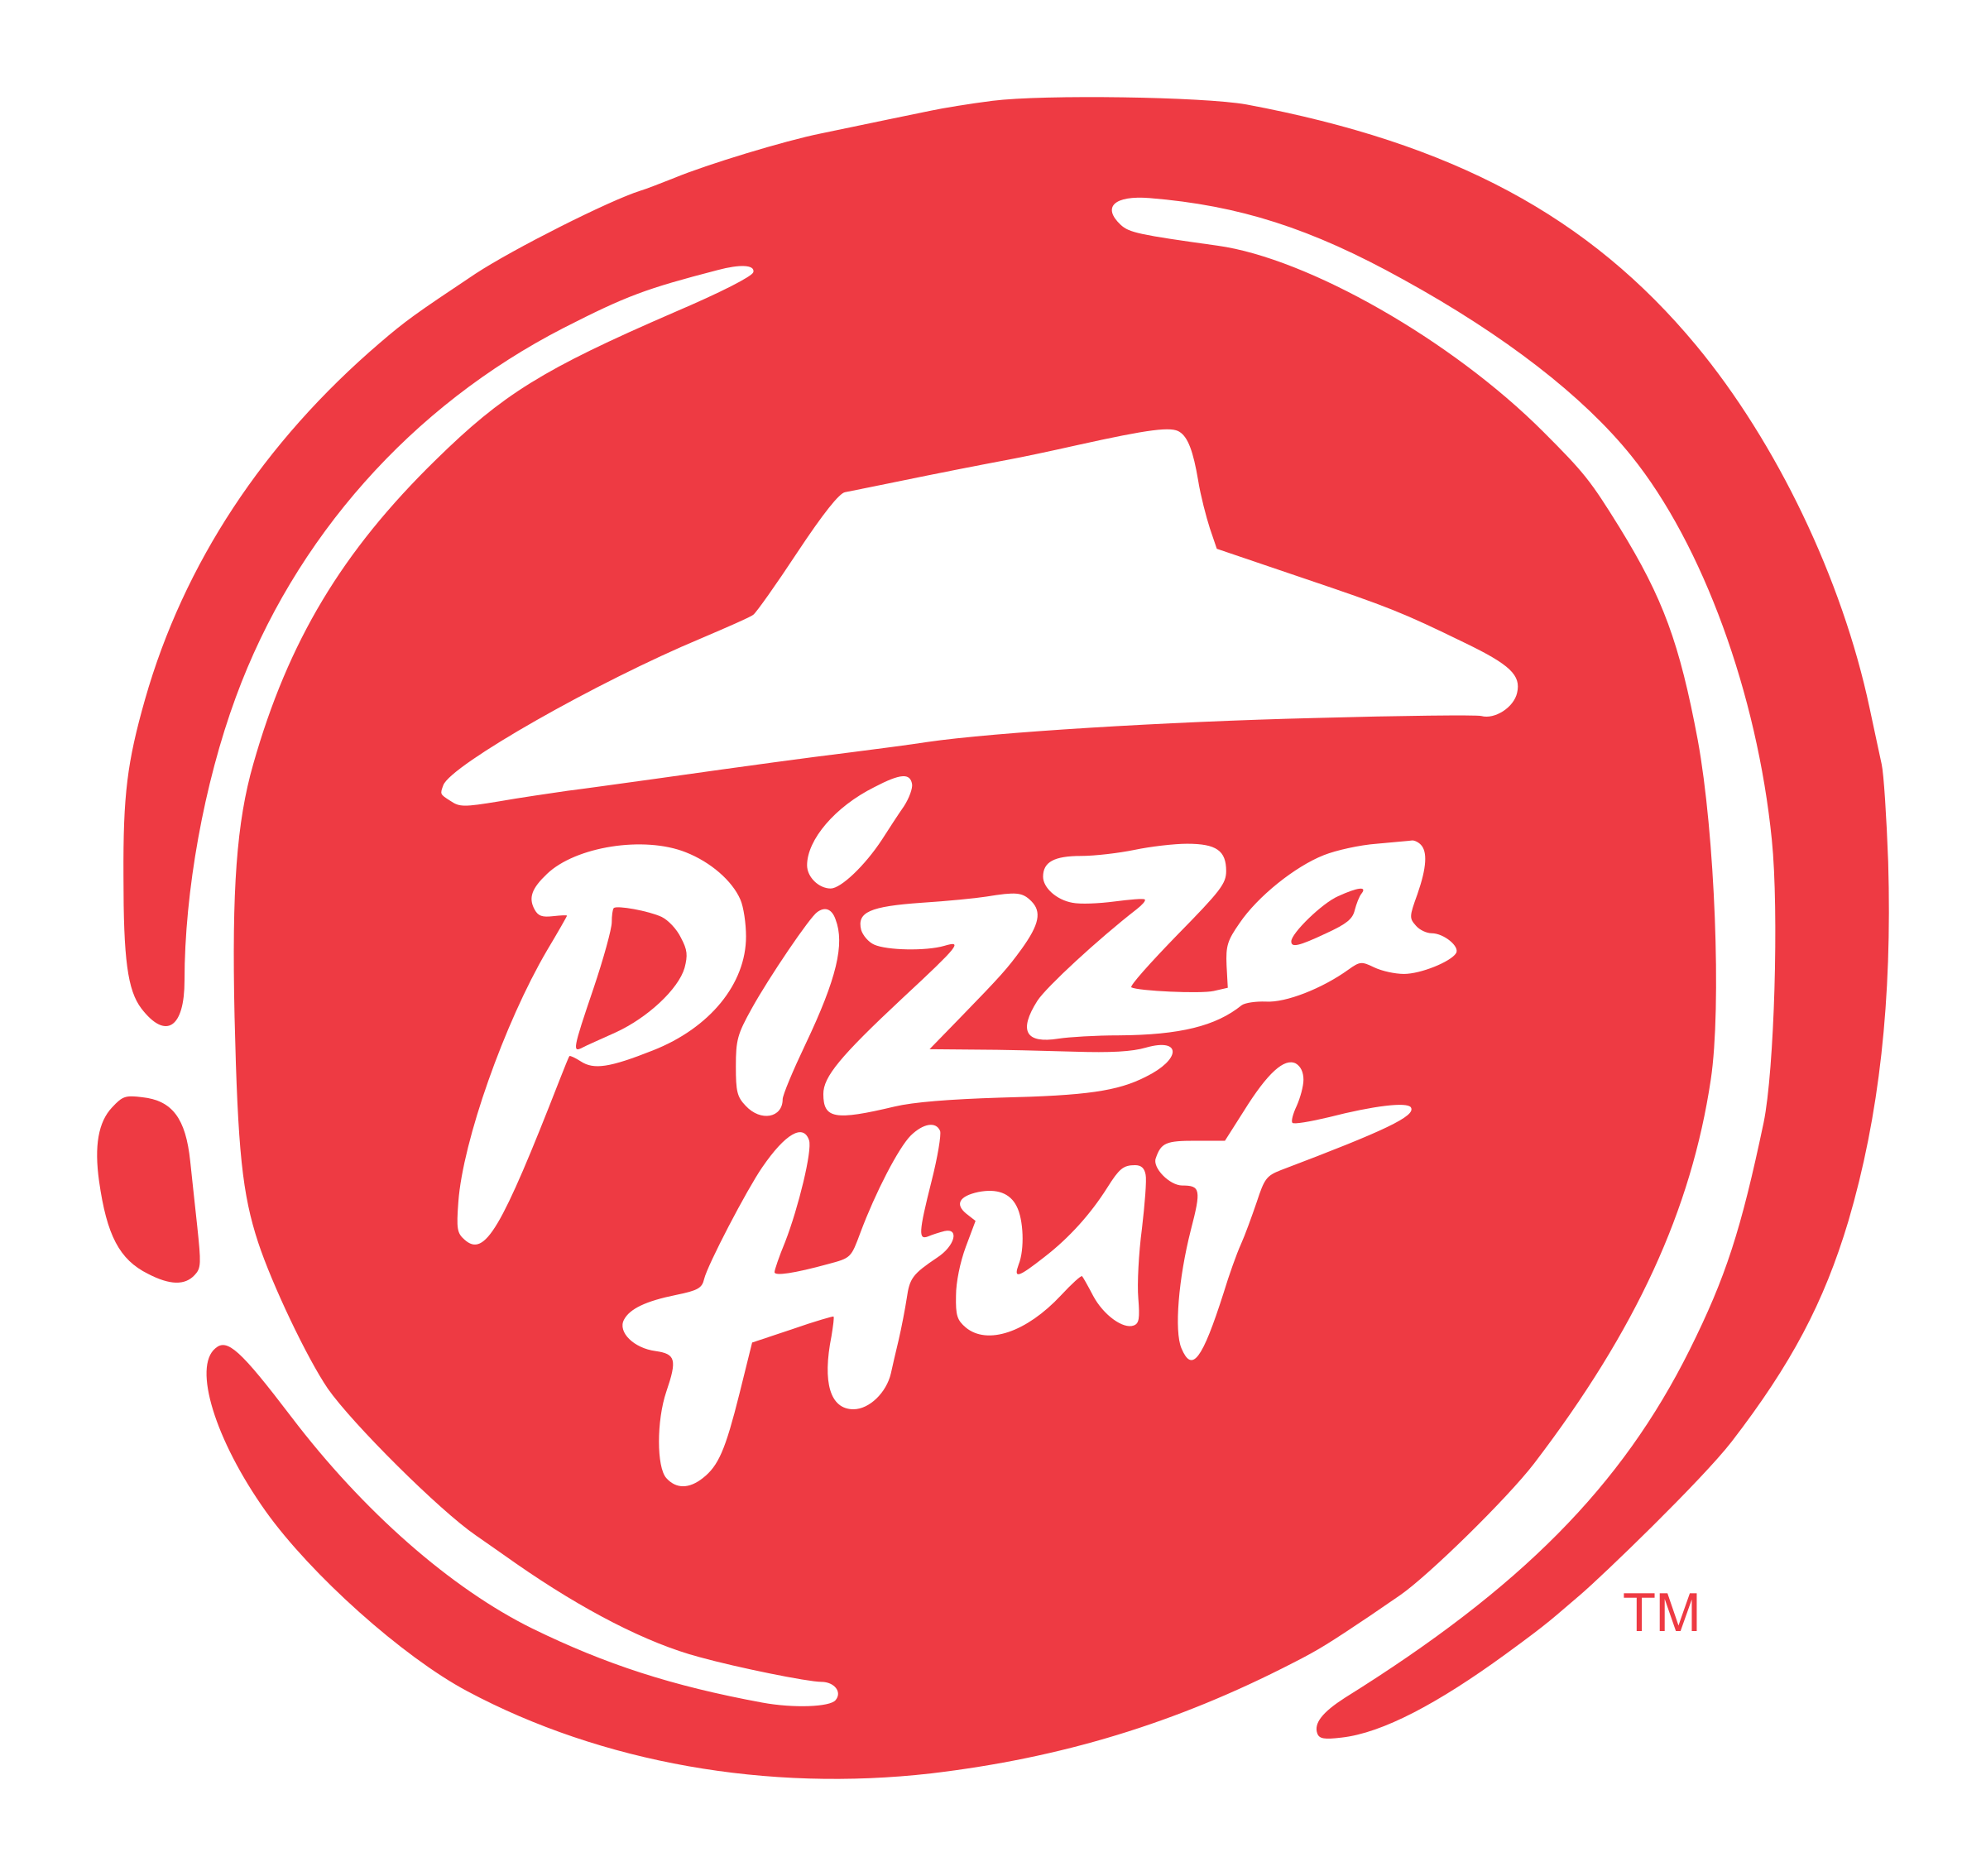 Pizza hut logo for apollyon.png